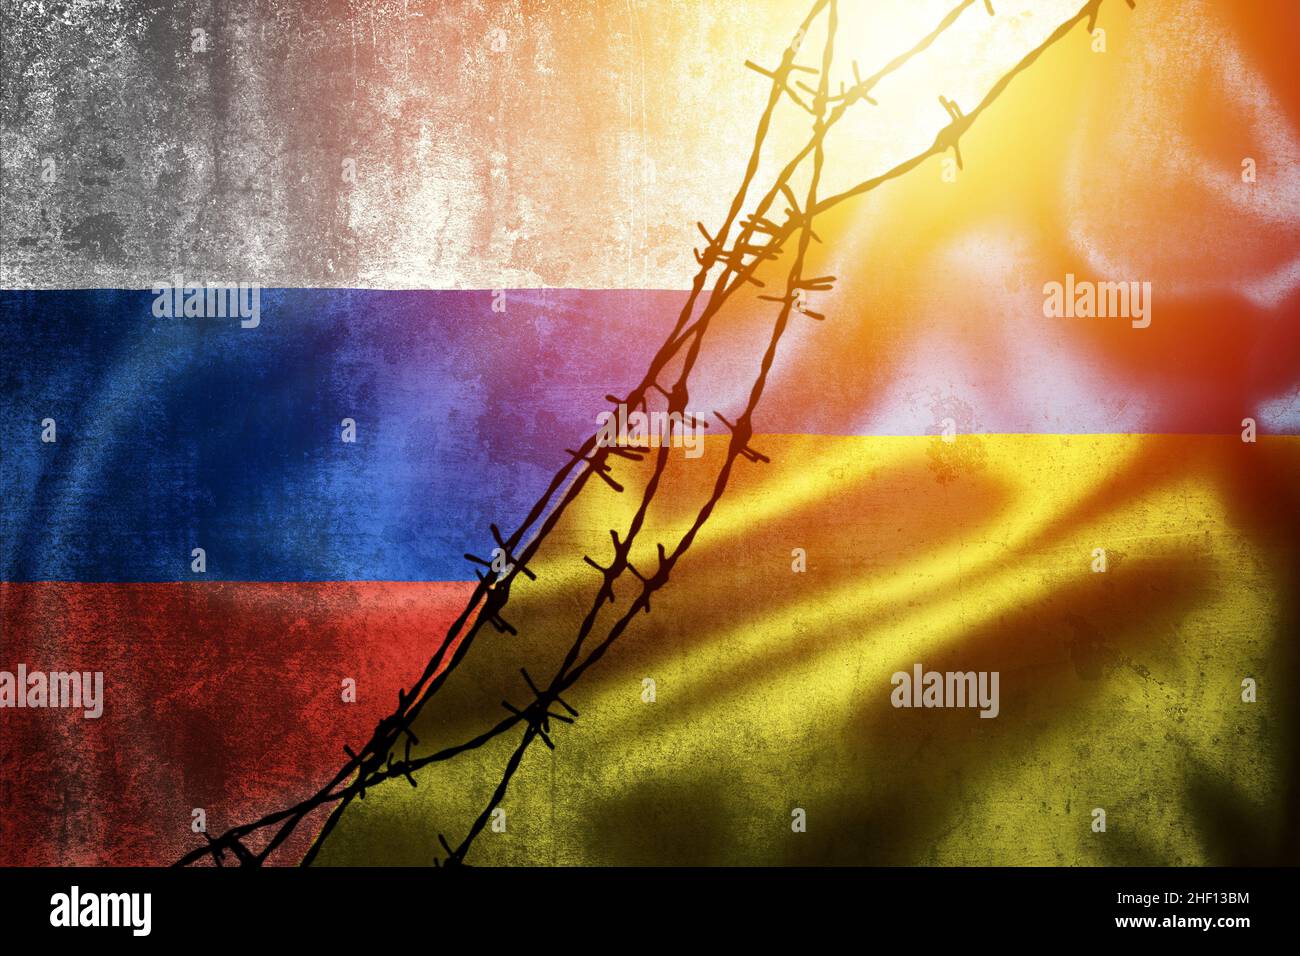 Grunge flags of Russian Federation and Ukraine divided by barb wire illustration, concept of tense relations between Ukraine and Russia Stock Photo